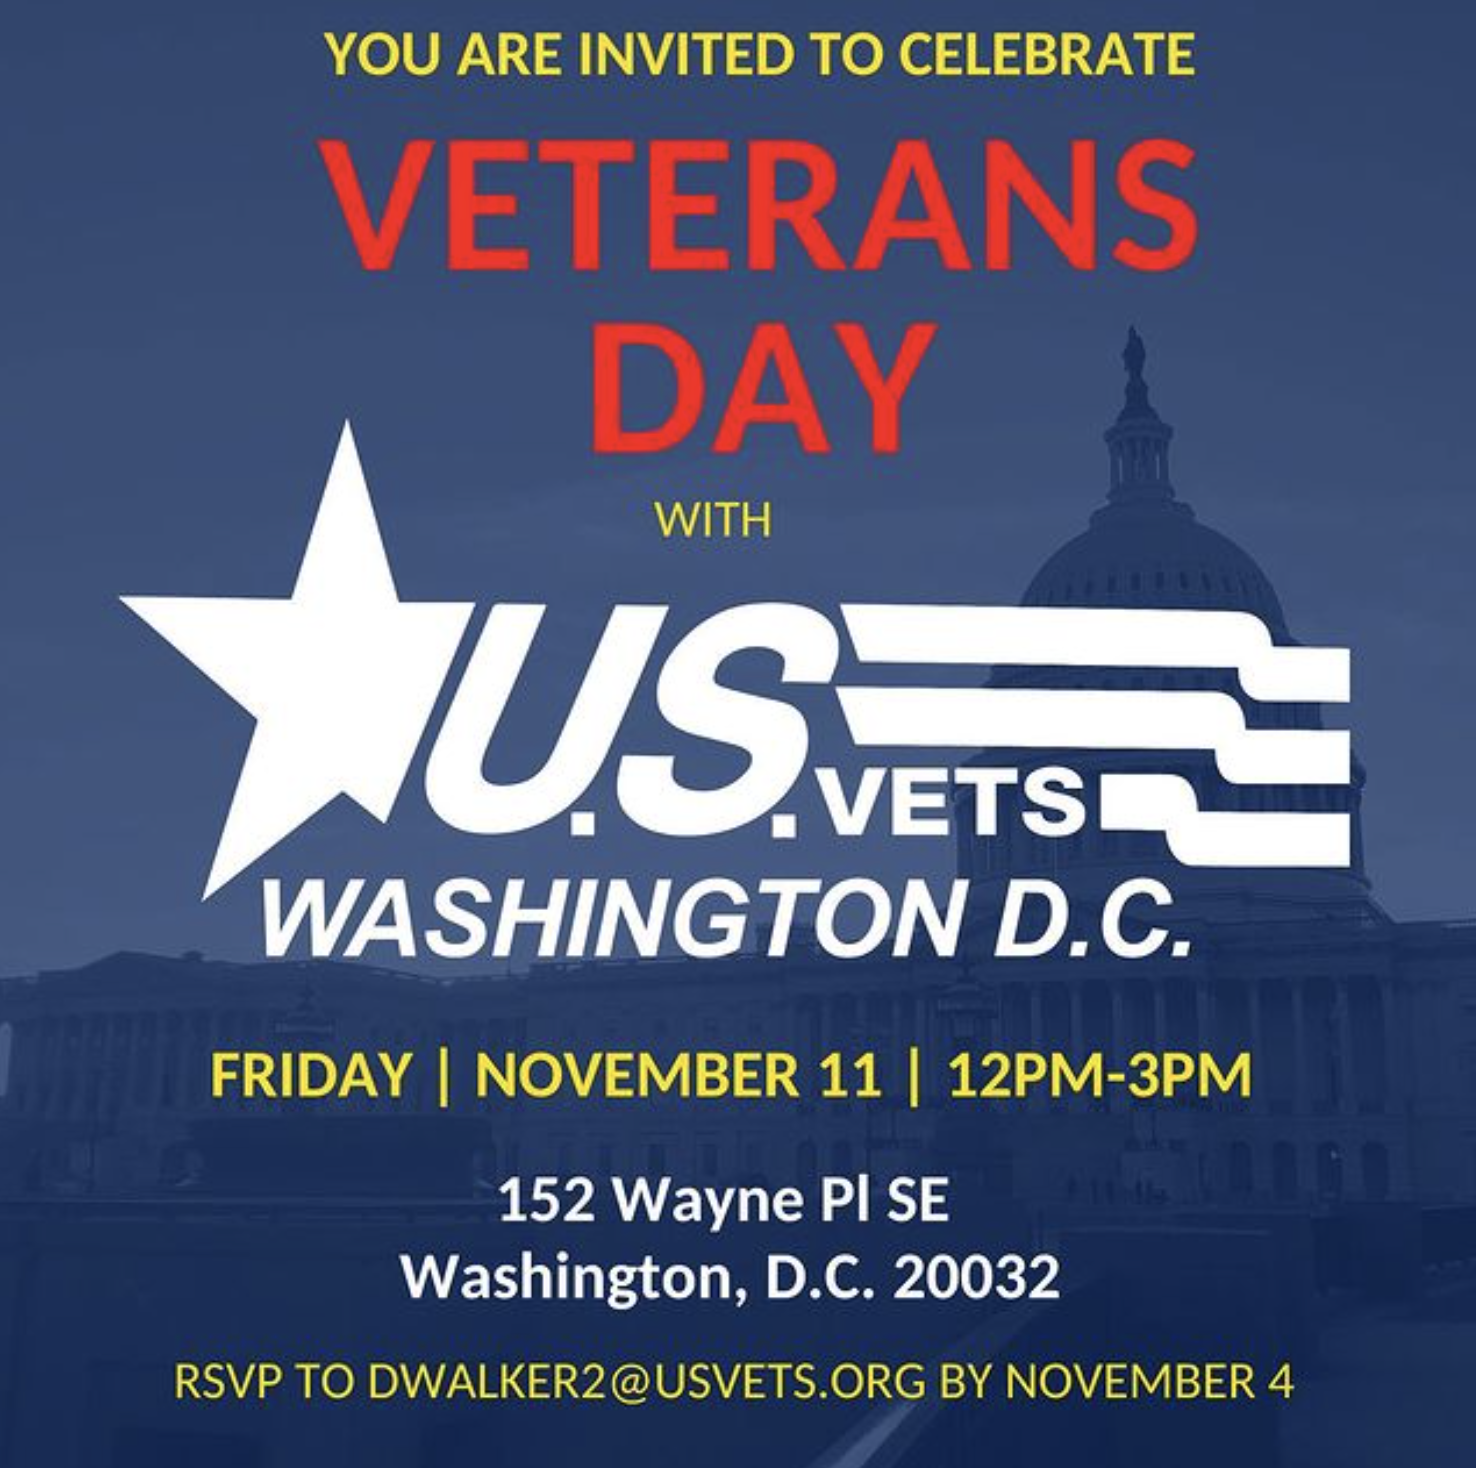 U.S.VETS to Hosts Veterans Day Event